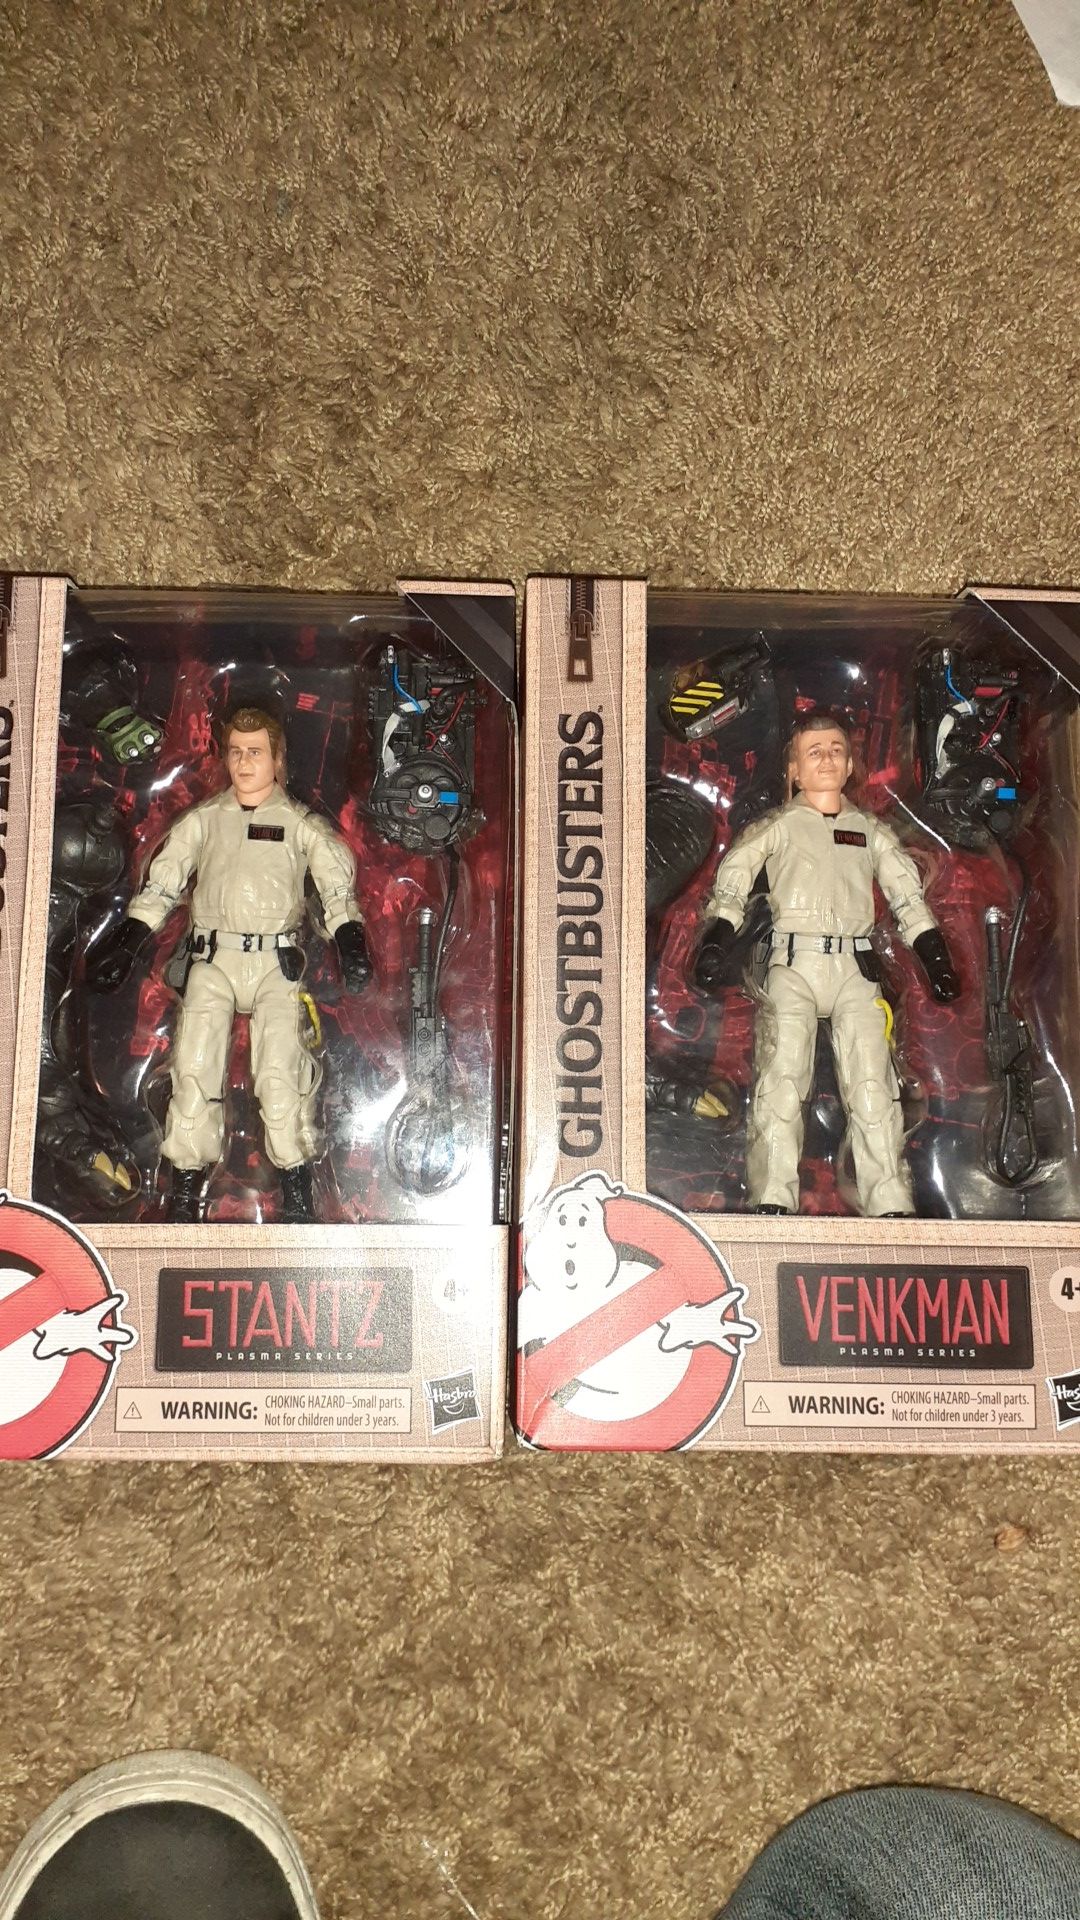 2 Ghostbusters action figures